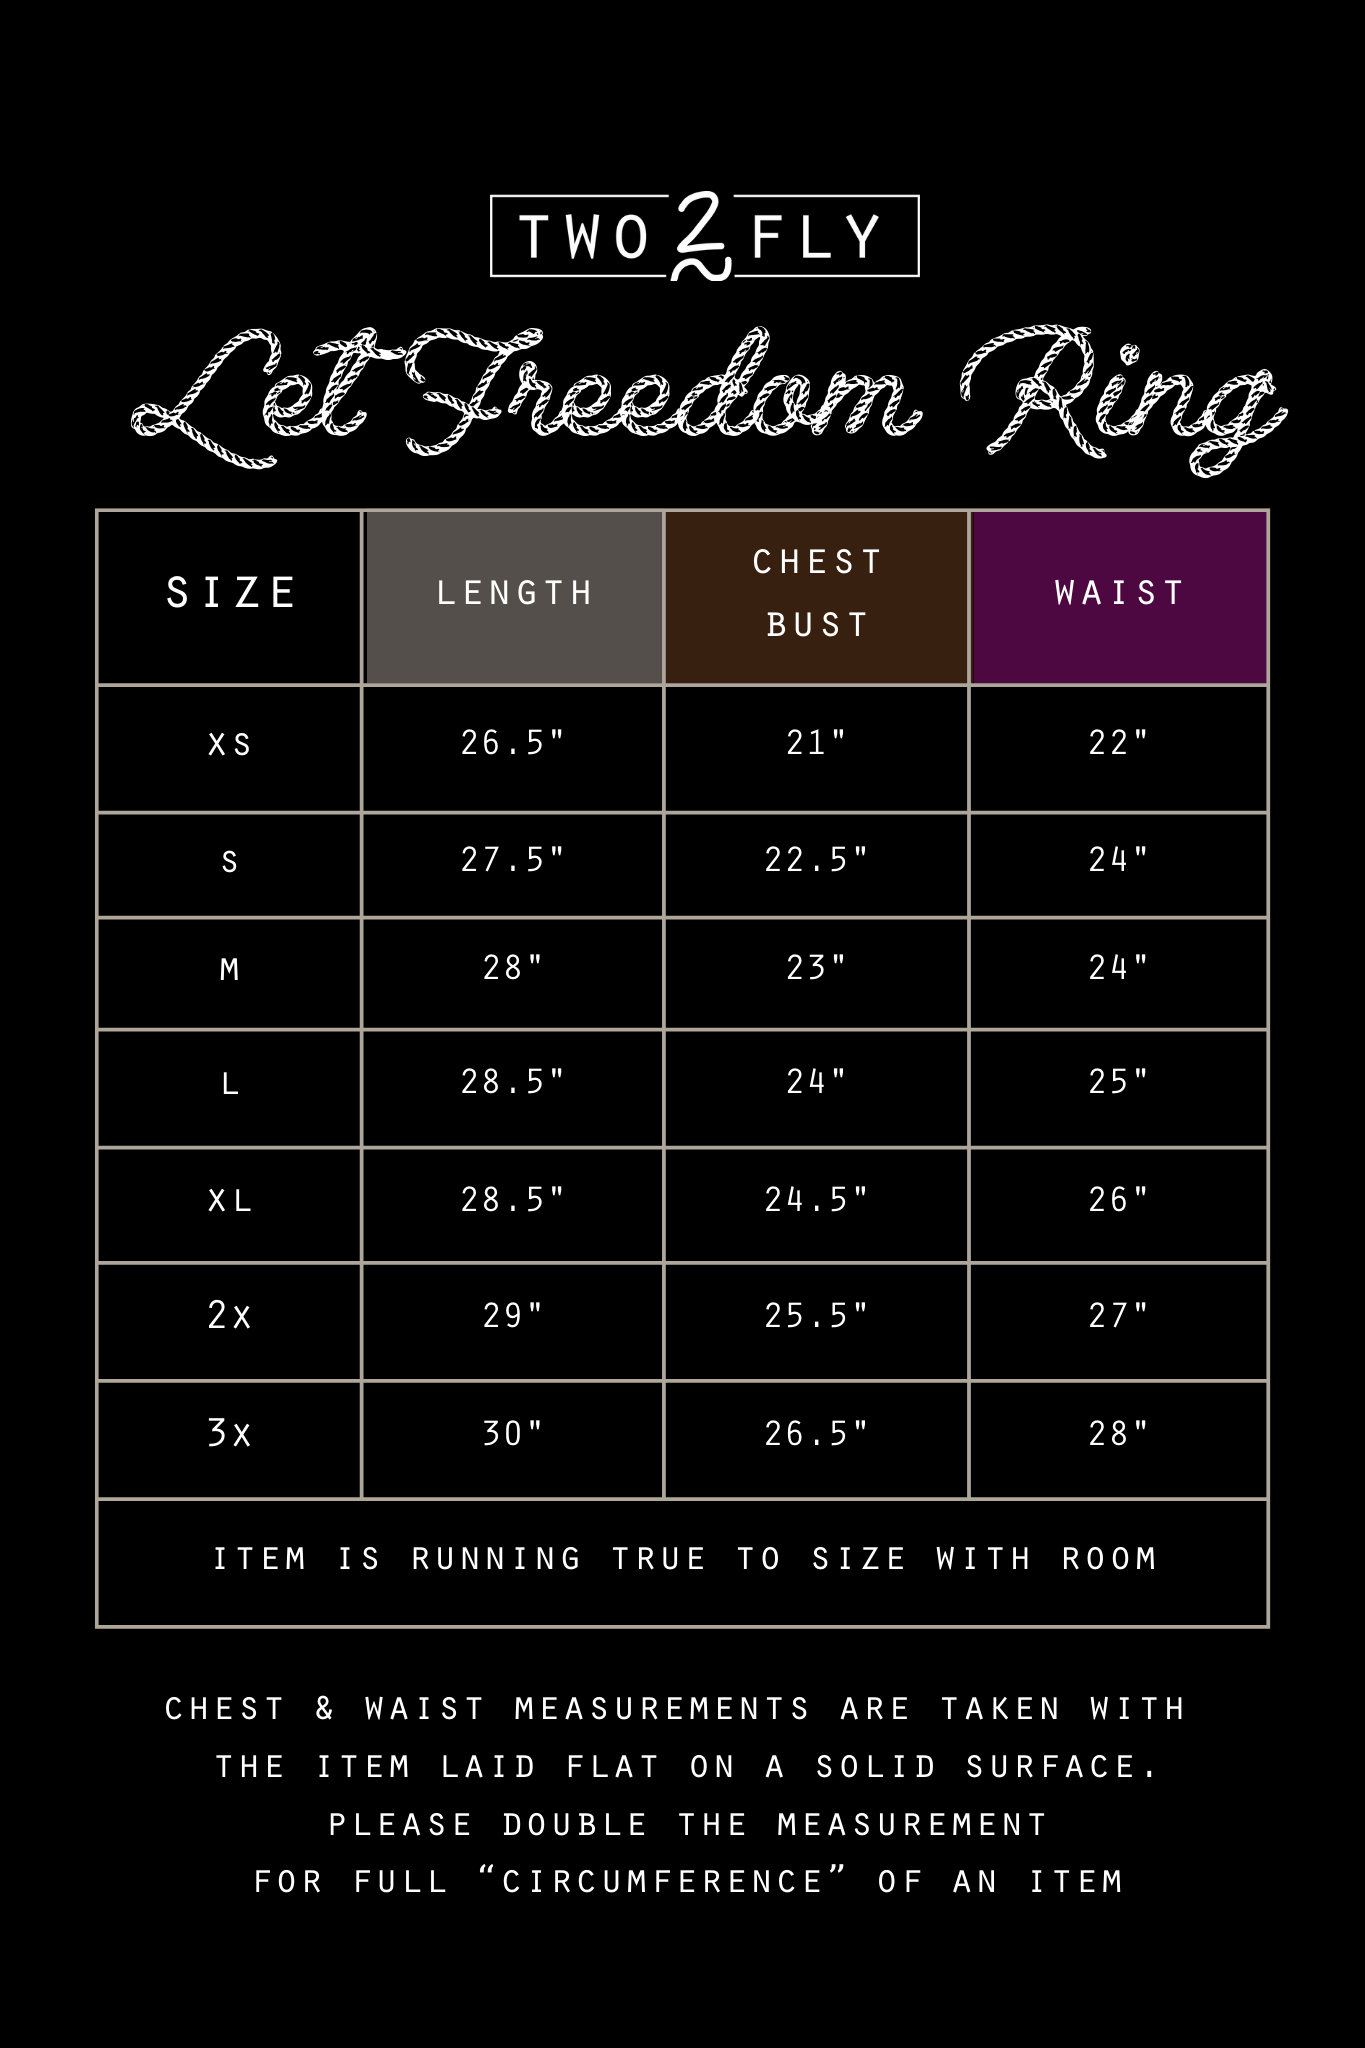 the Let |Freedom| Ring top